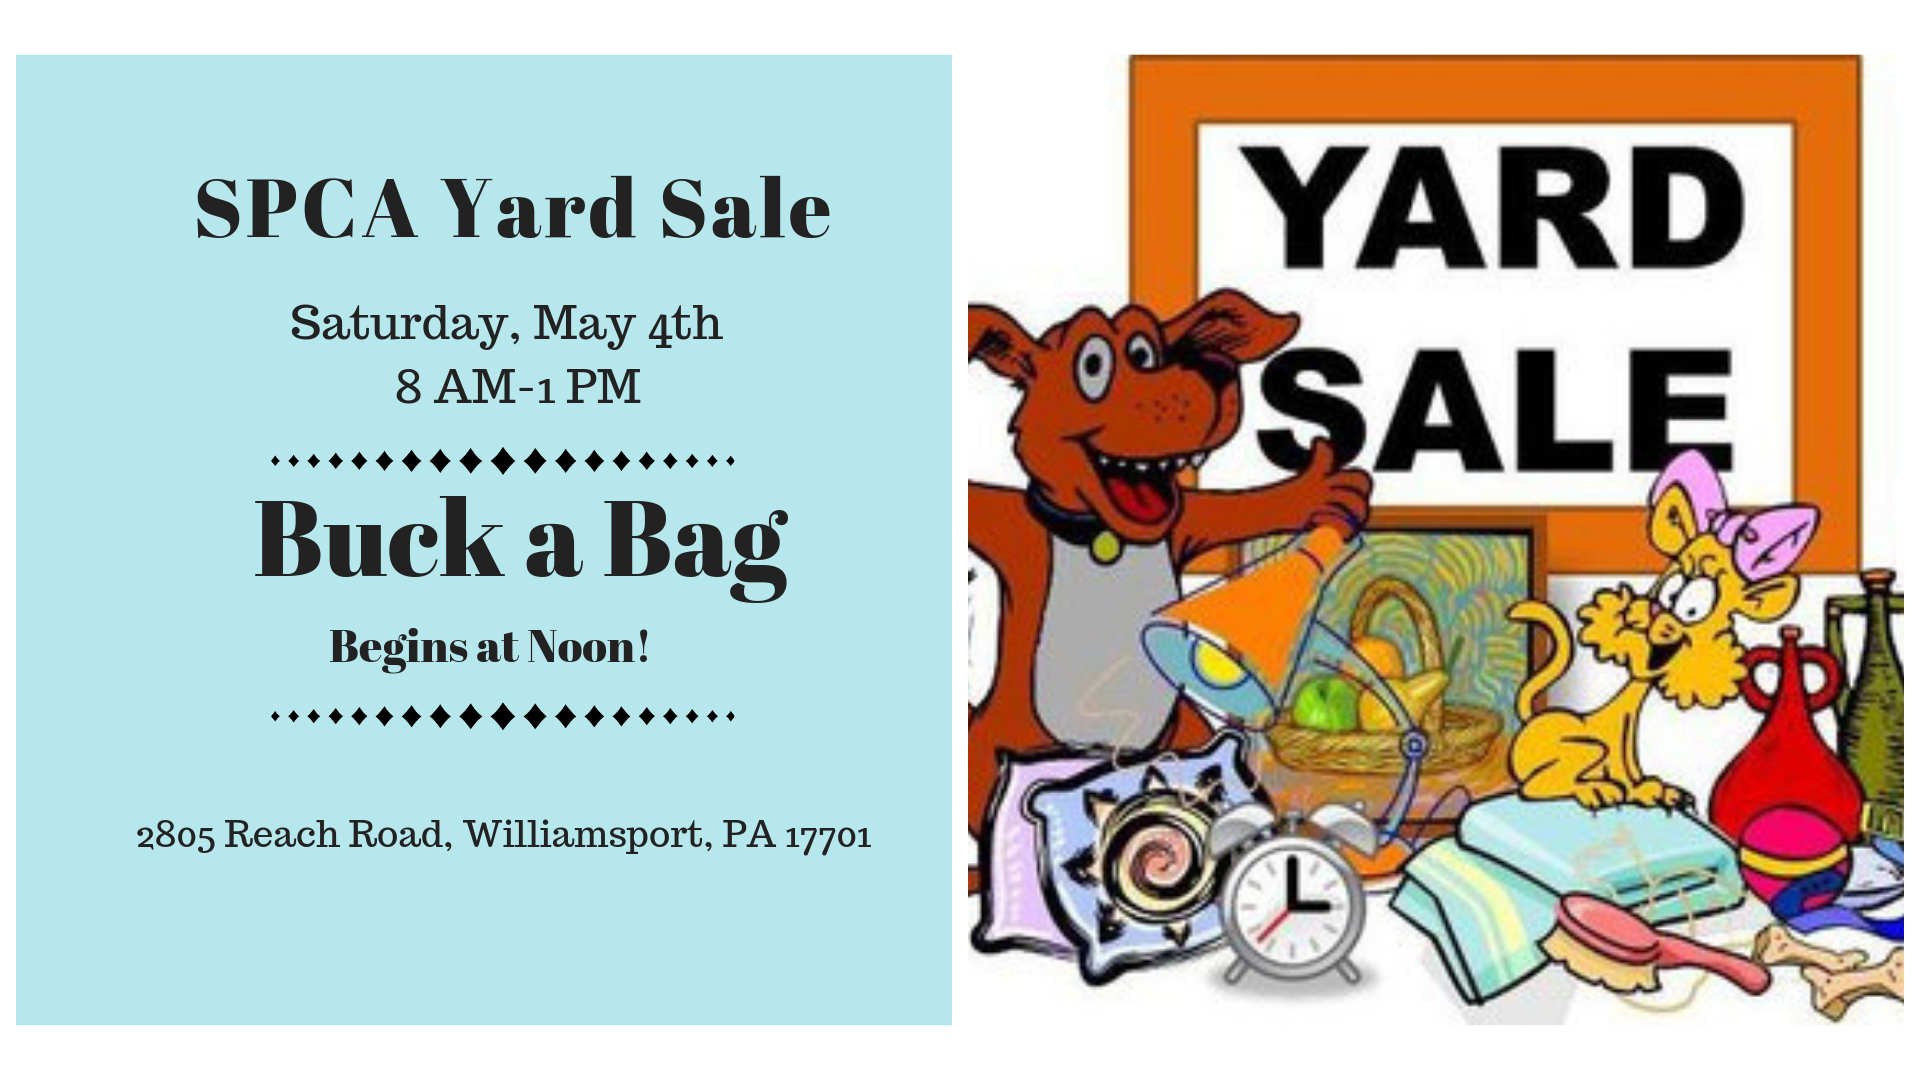 Yard Sale Collection Begins Lying County Spca